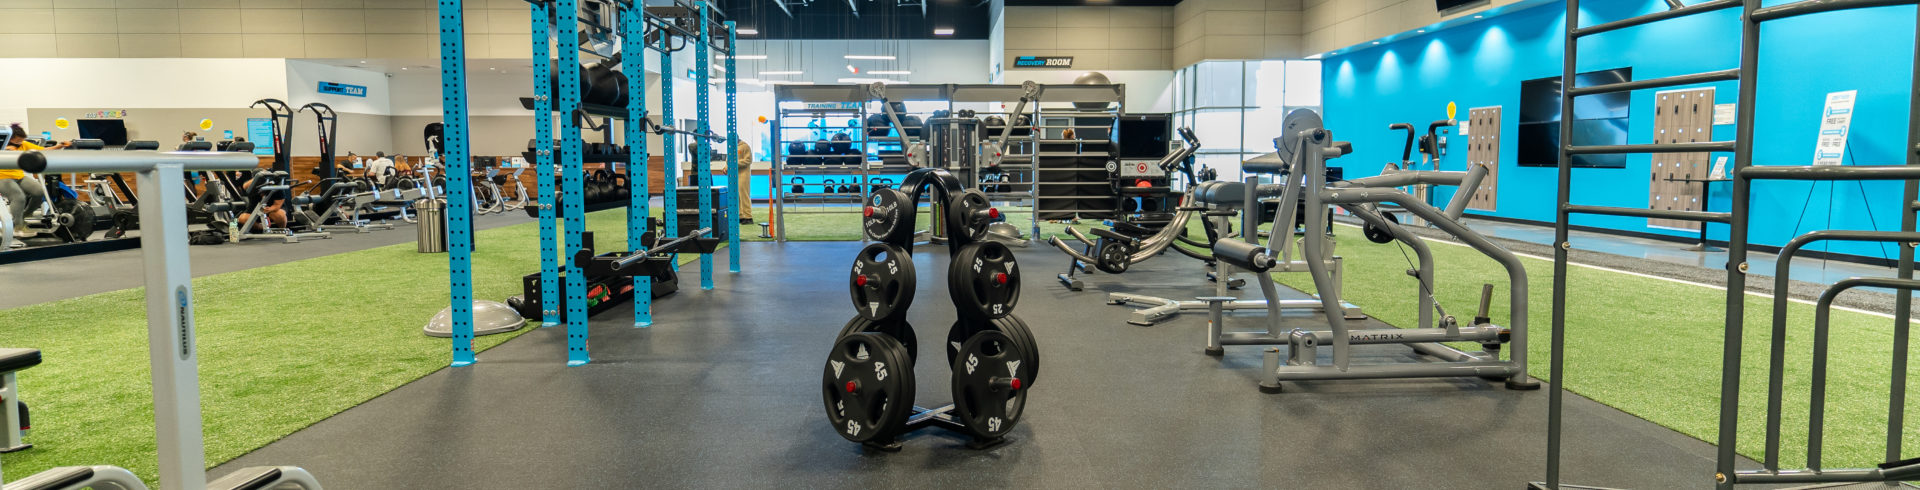 EōS Fitness Hits the Ground Running in the New Year with 2 New Nevada  Locations